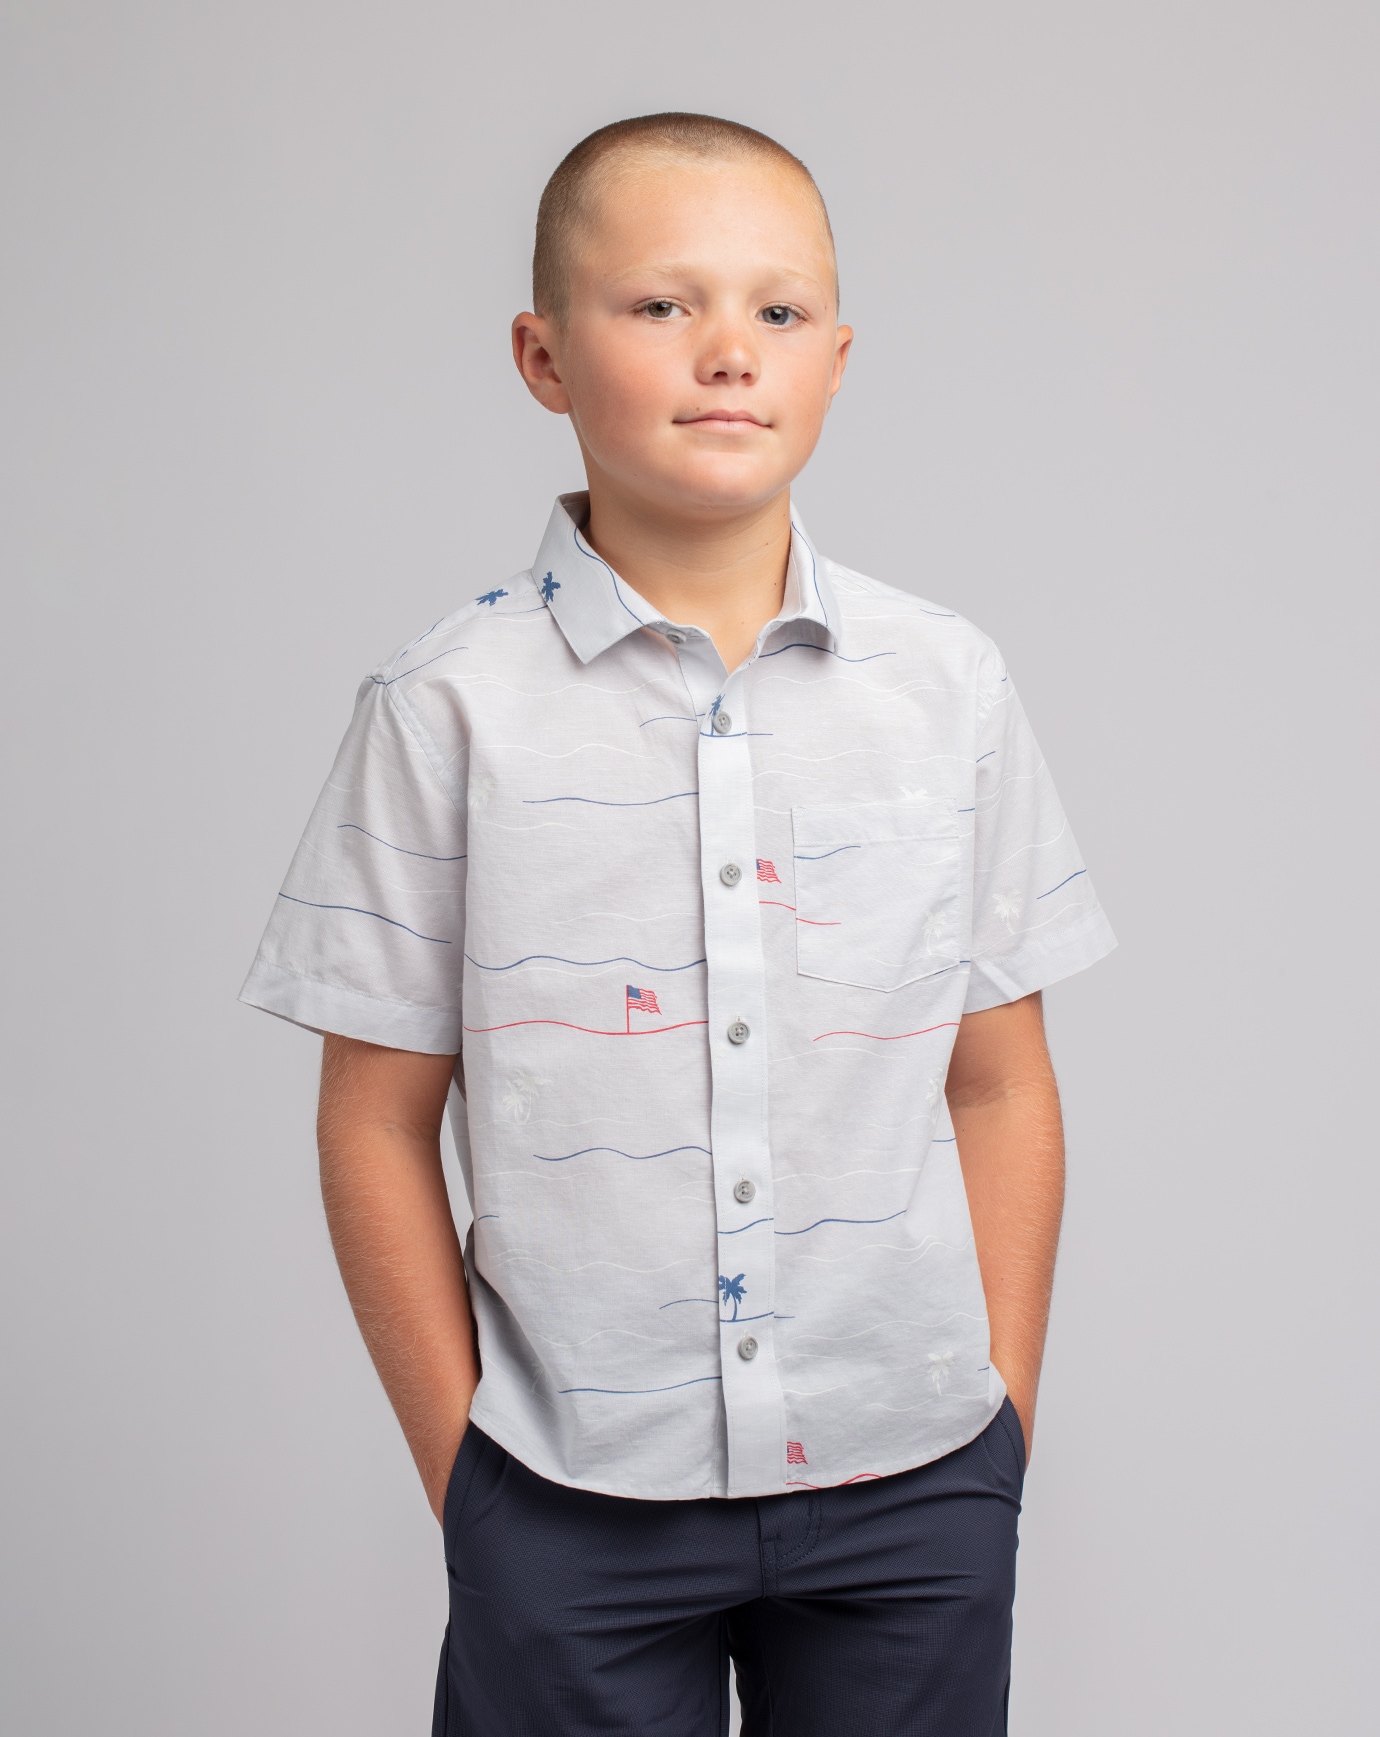 STAR SPANGLED BANNER YOUTH BUTTON-DOWN